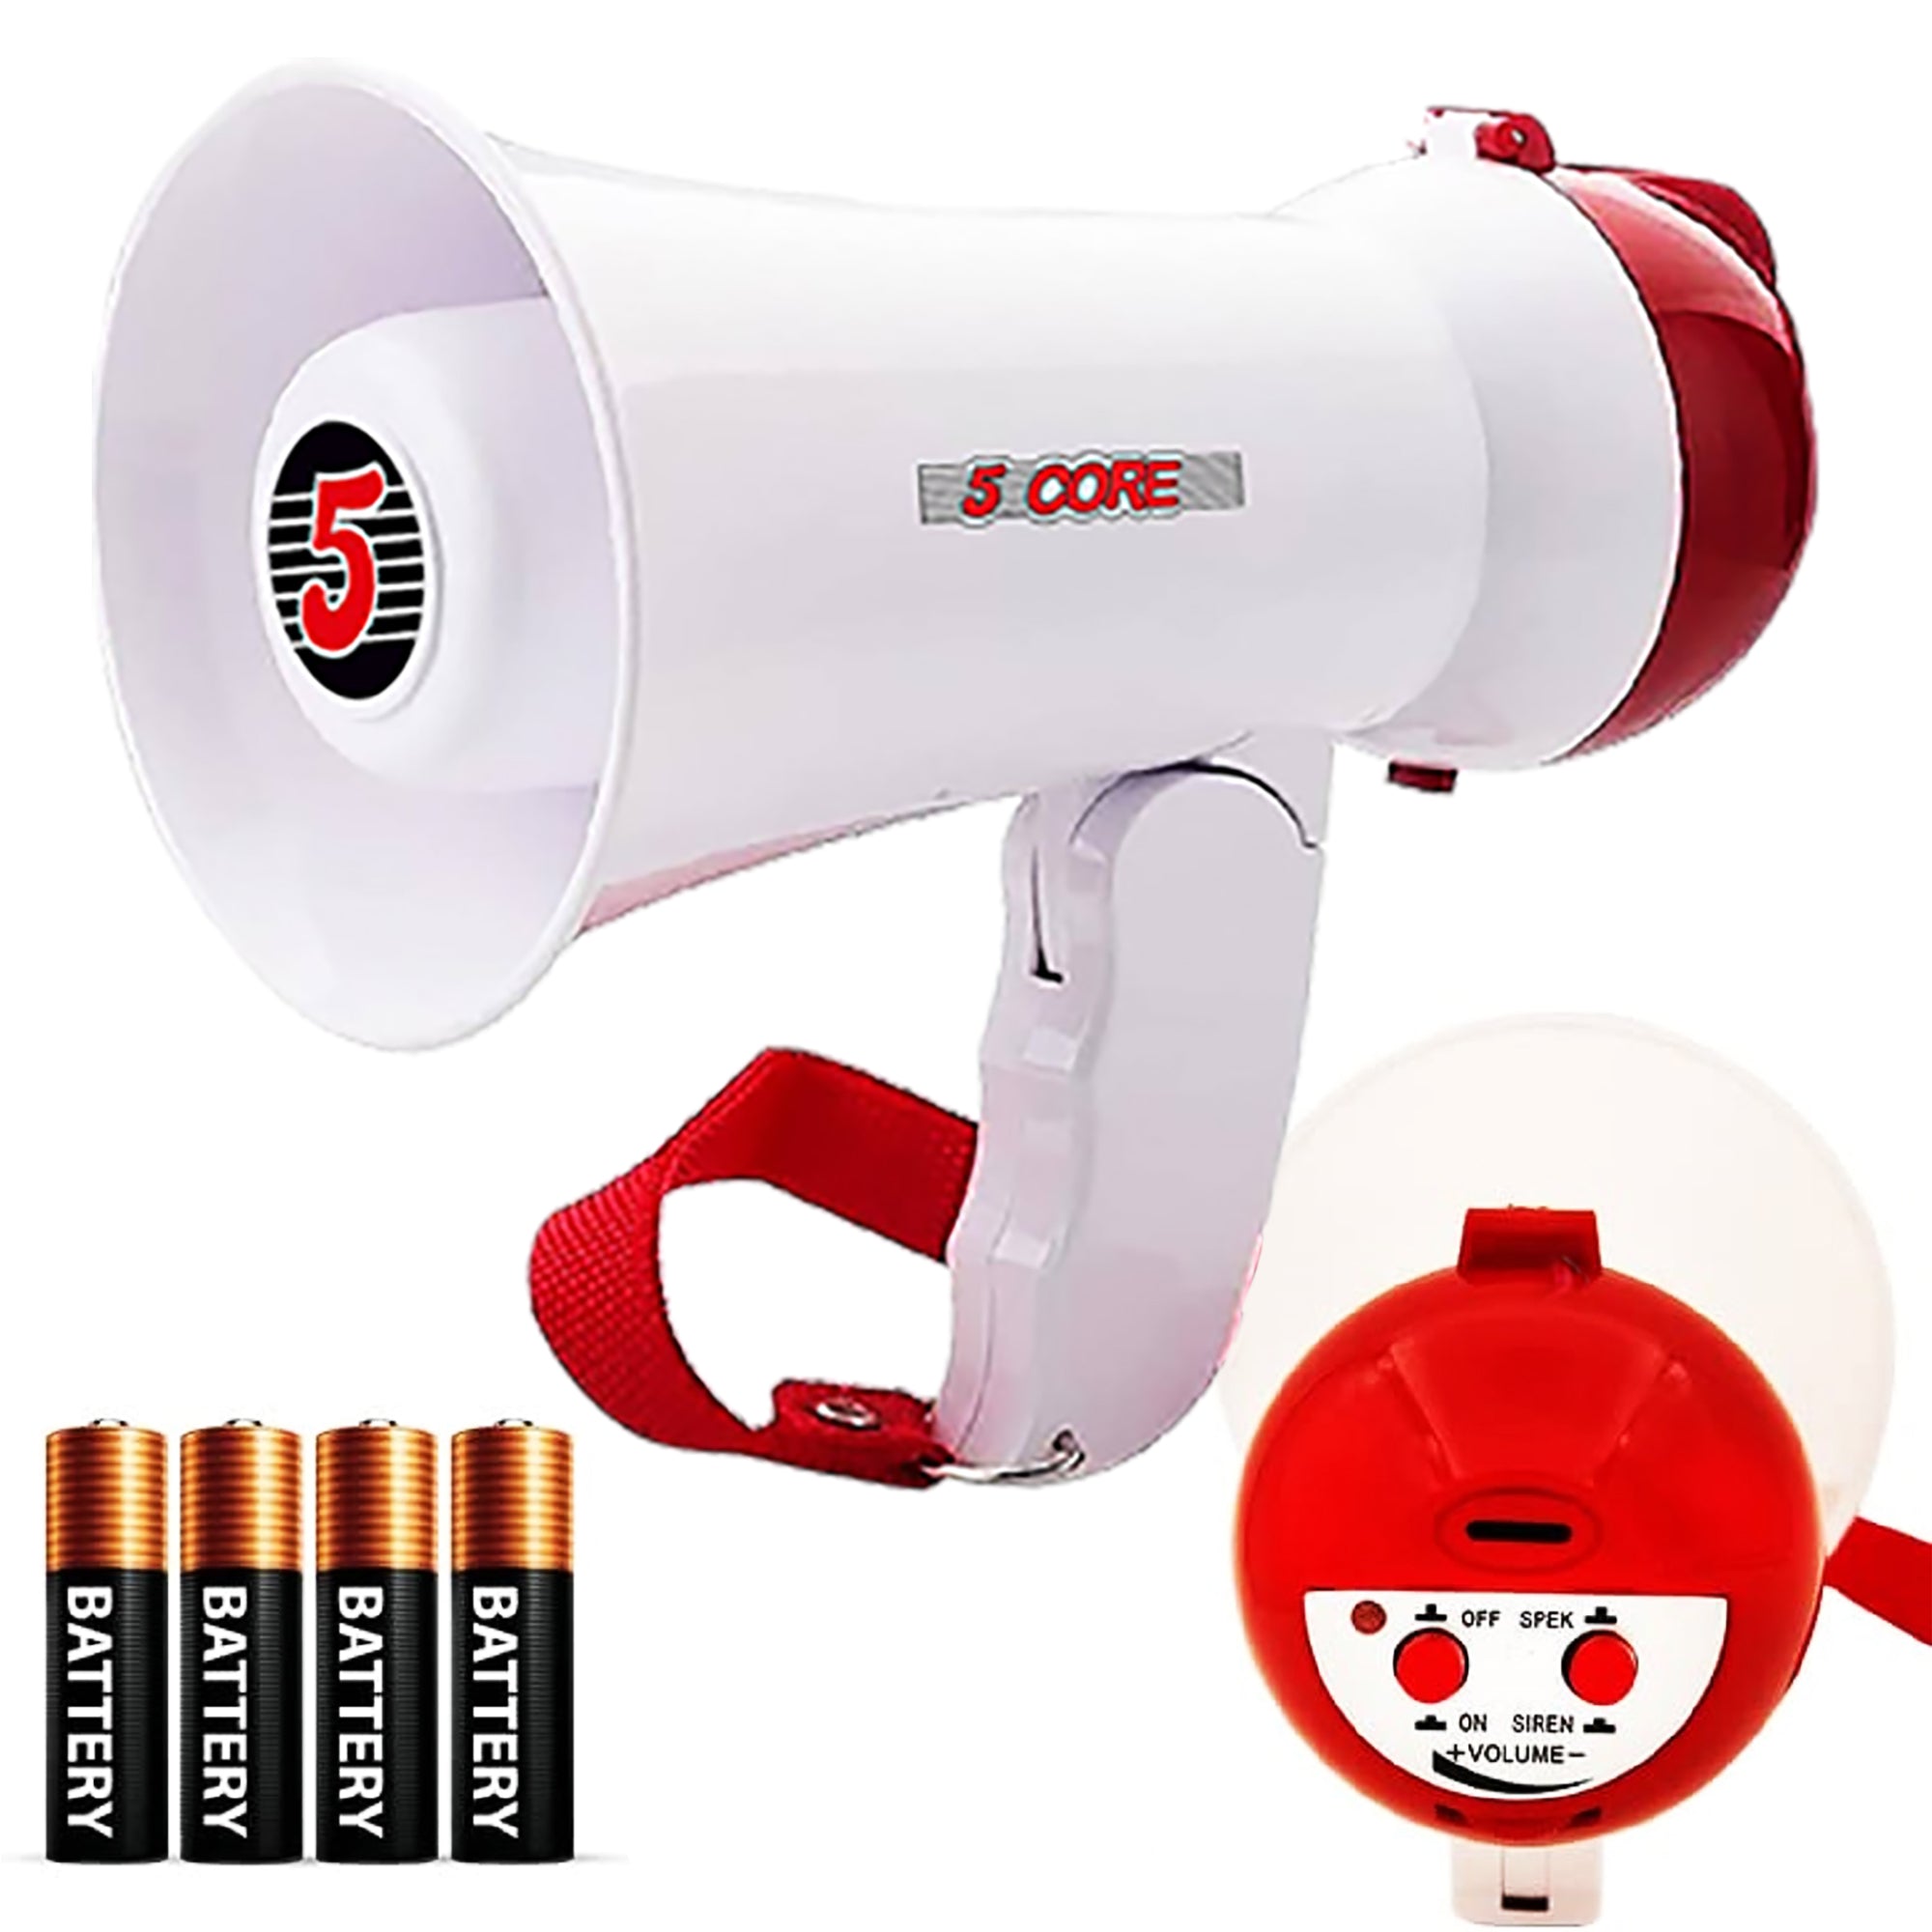 5 Core Megaphone PA Speaker 15W Bull Horn Loud Speaker Portable PA Horn w Volume Control Siren Alarm Noise Maker for Sporting Event Party Crowd Control 400 Yard Range Includes Battery - HW 1 BTRY